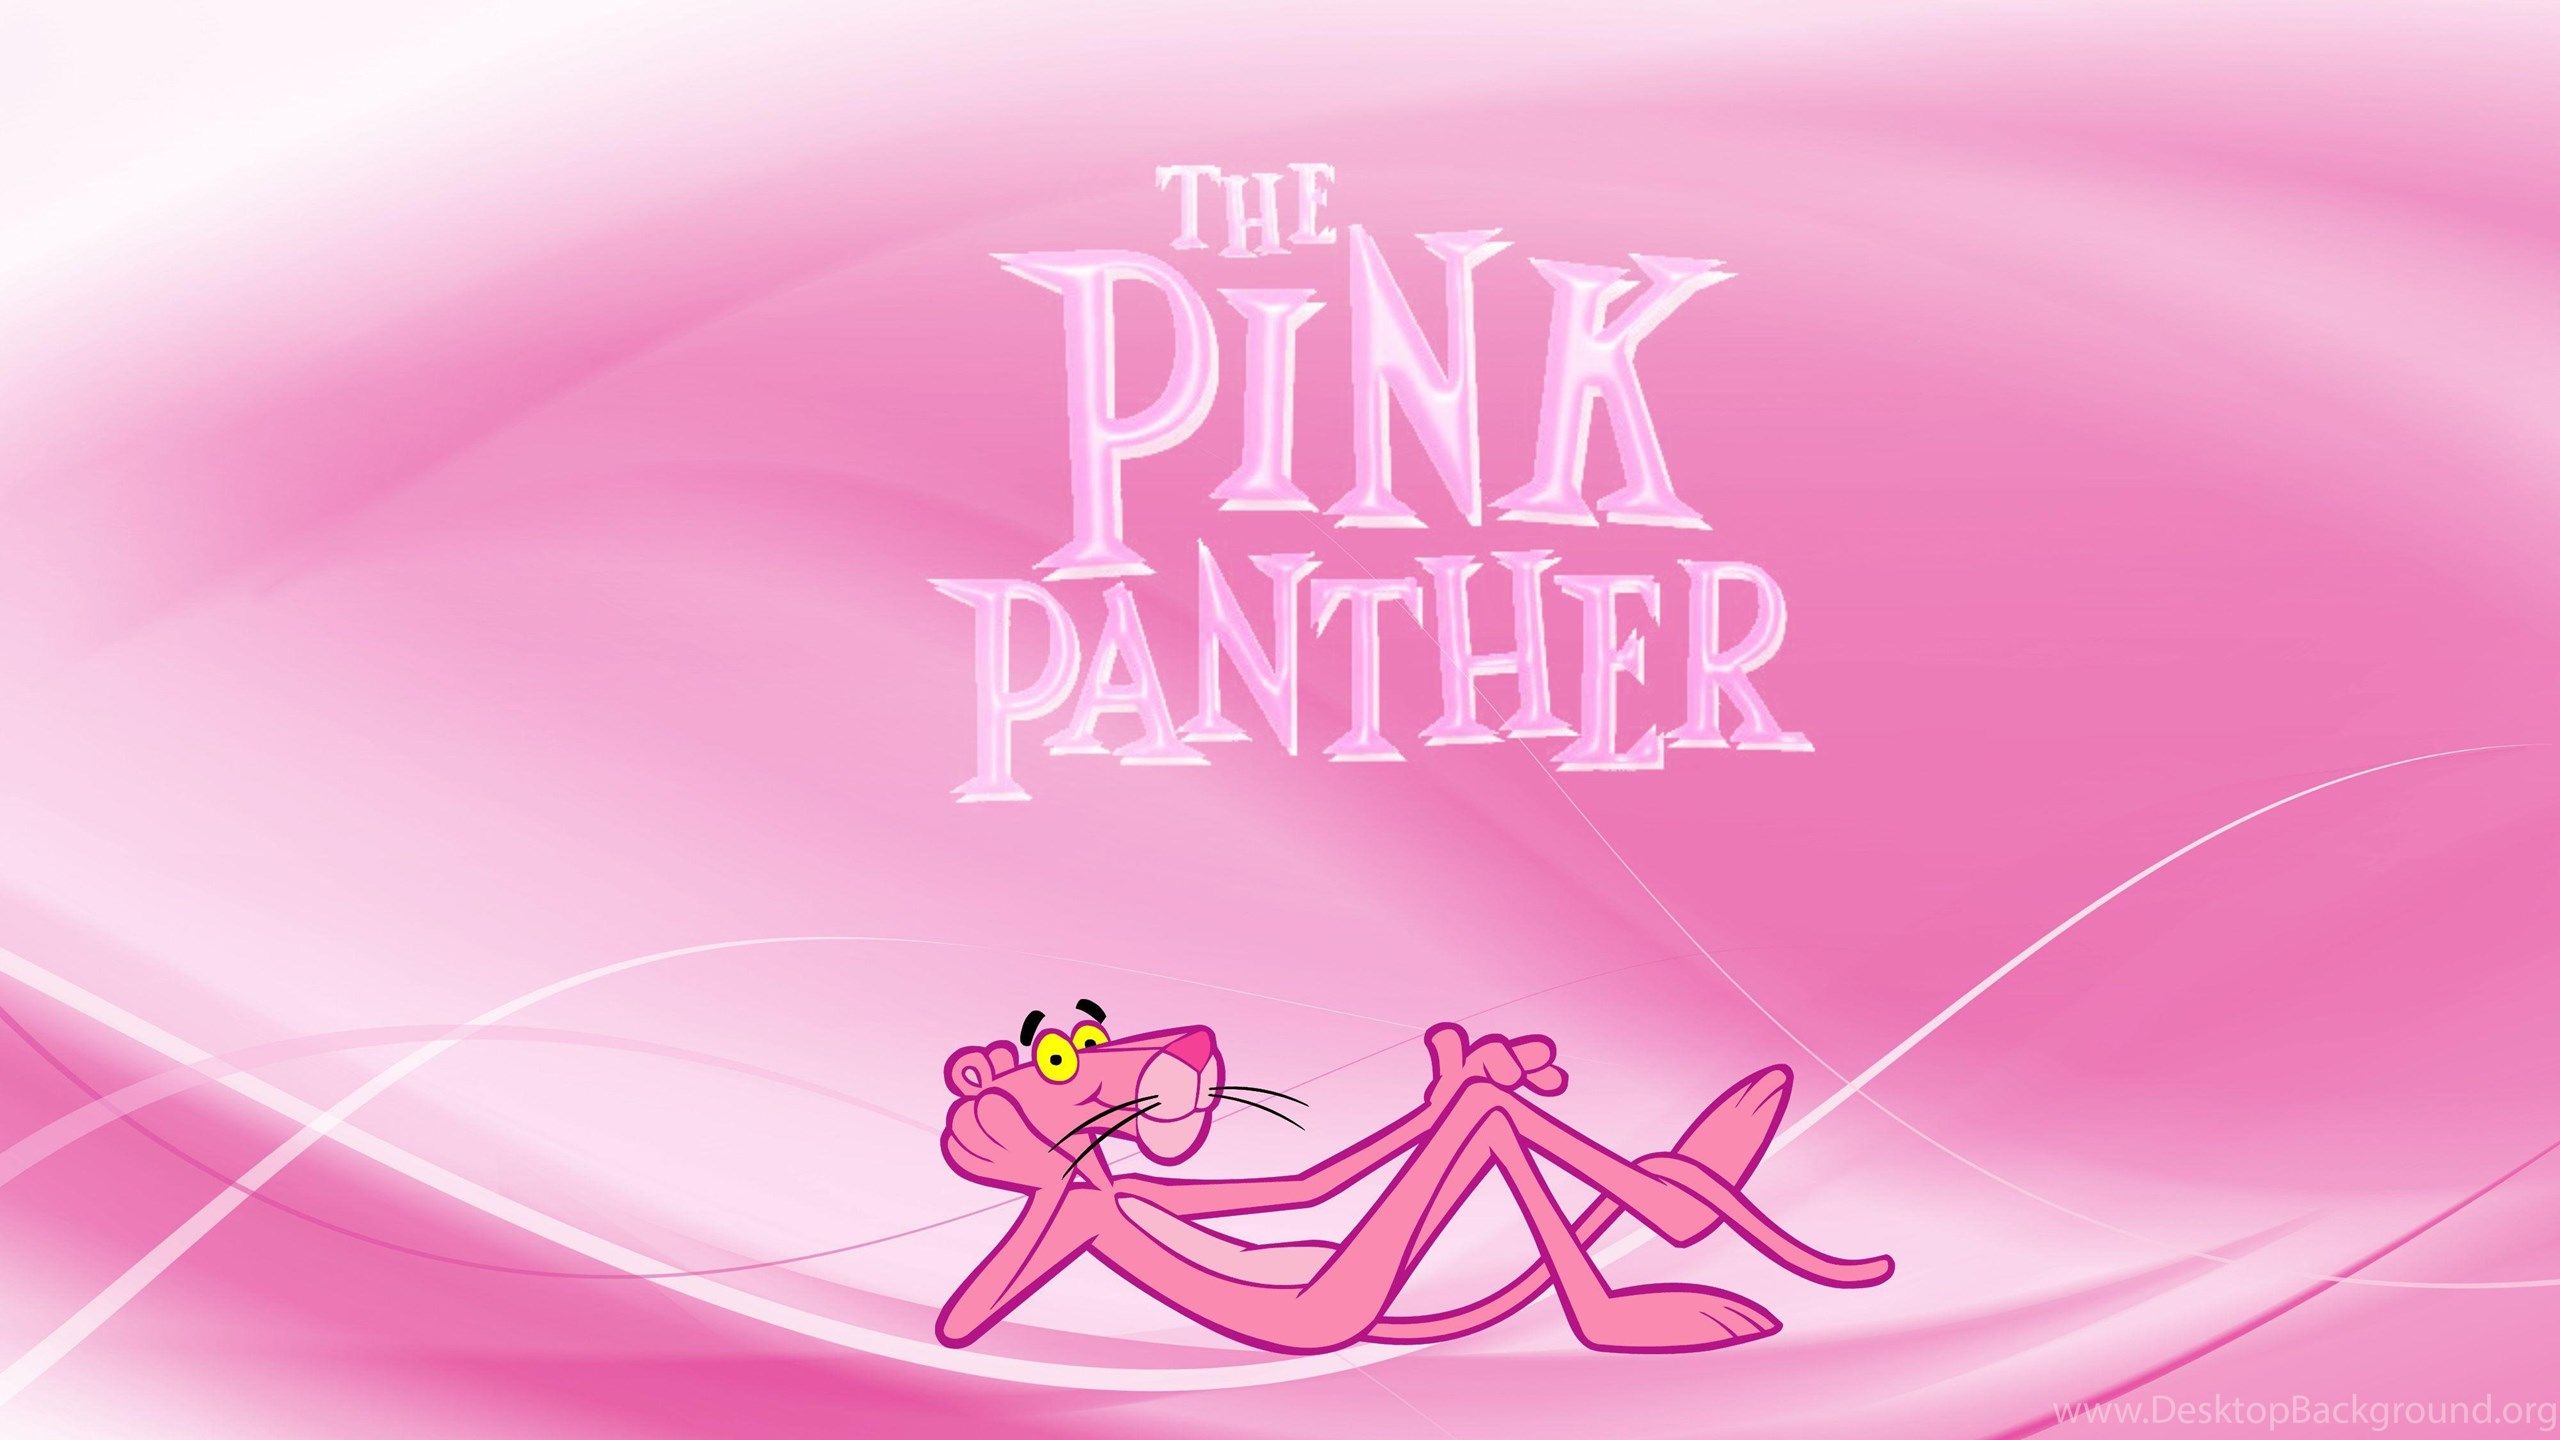 The Pink Panther Wallpapers - Desktop Background - Pink Panther